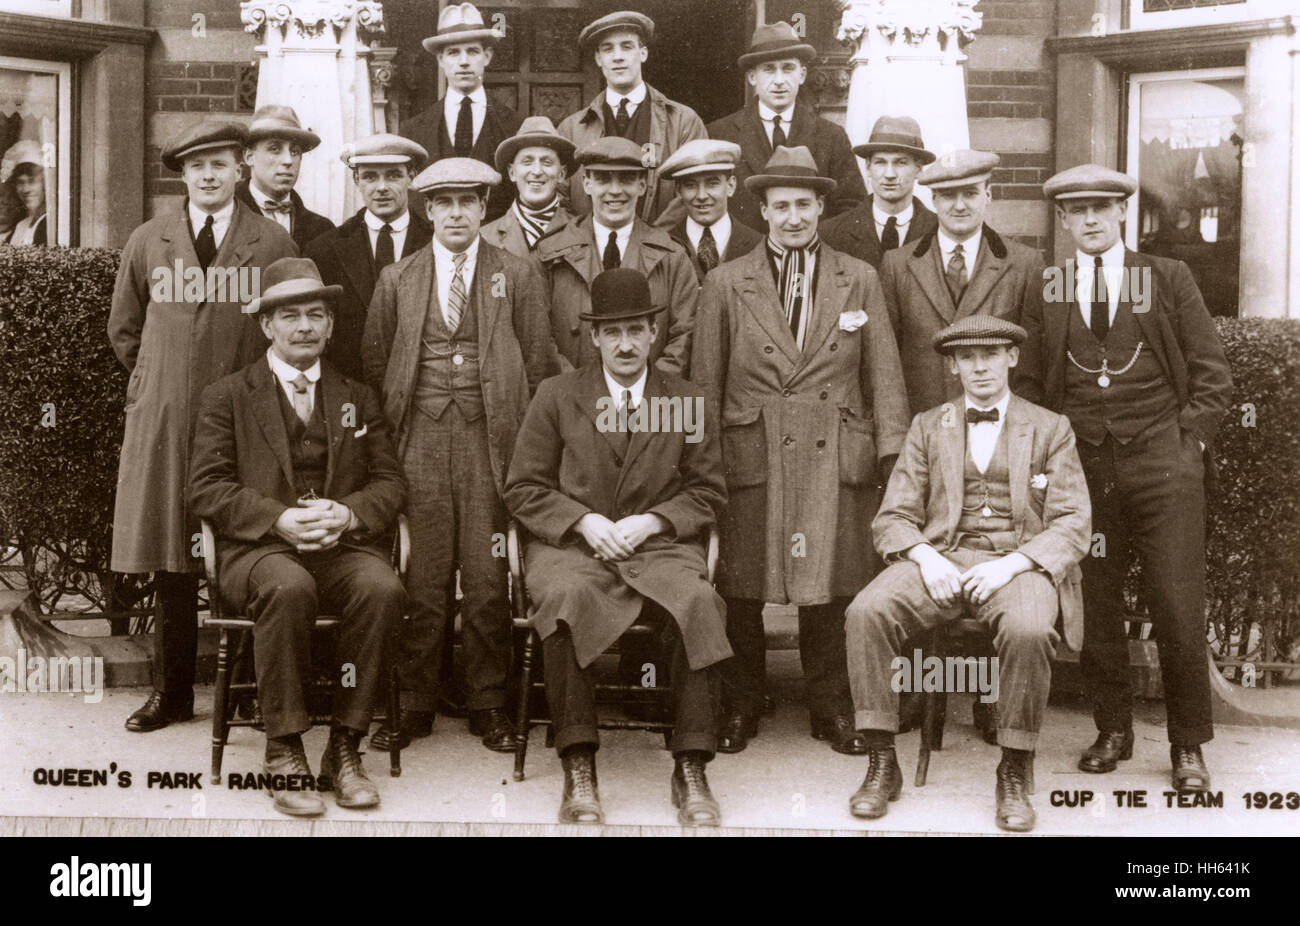 Queen's Park Rangers FC football team and management, Cup Tie Team 1923, posing in suits and coats outside a house. Stock Photo